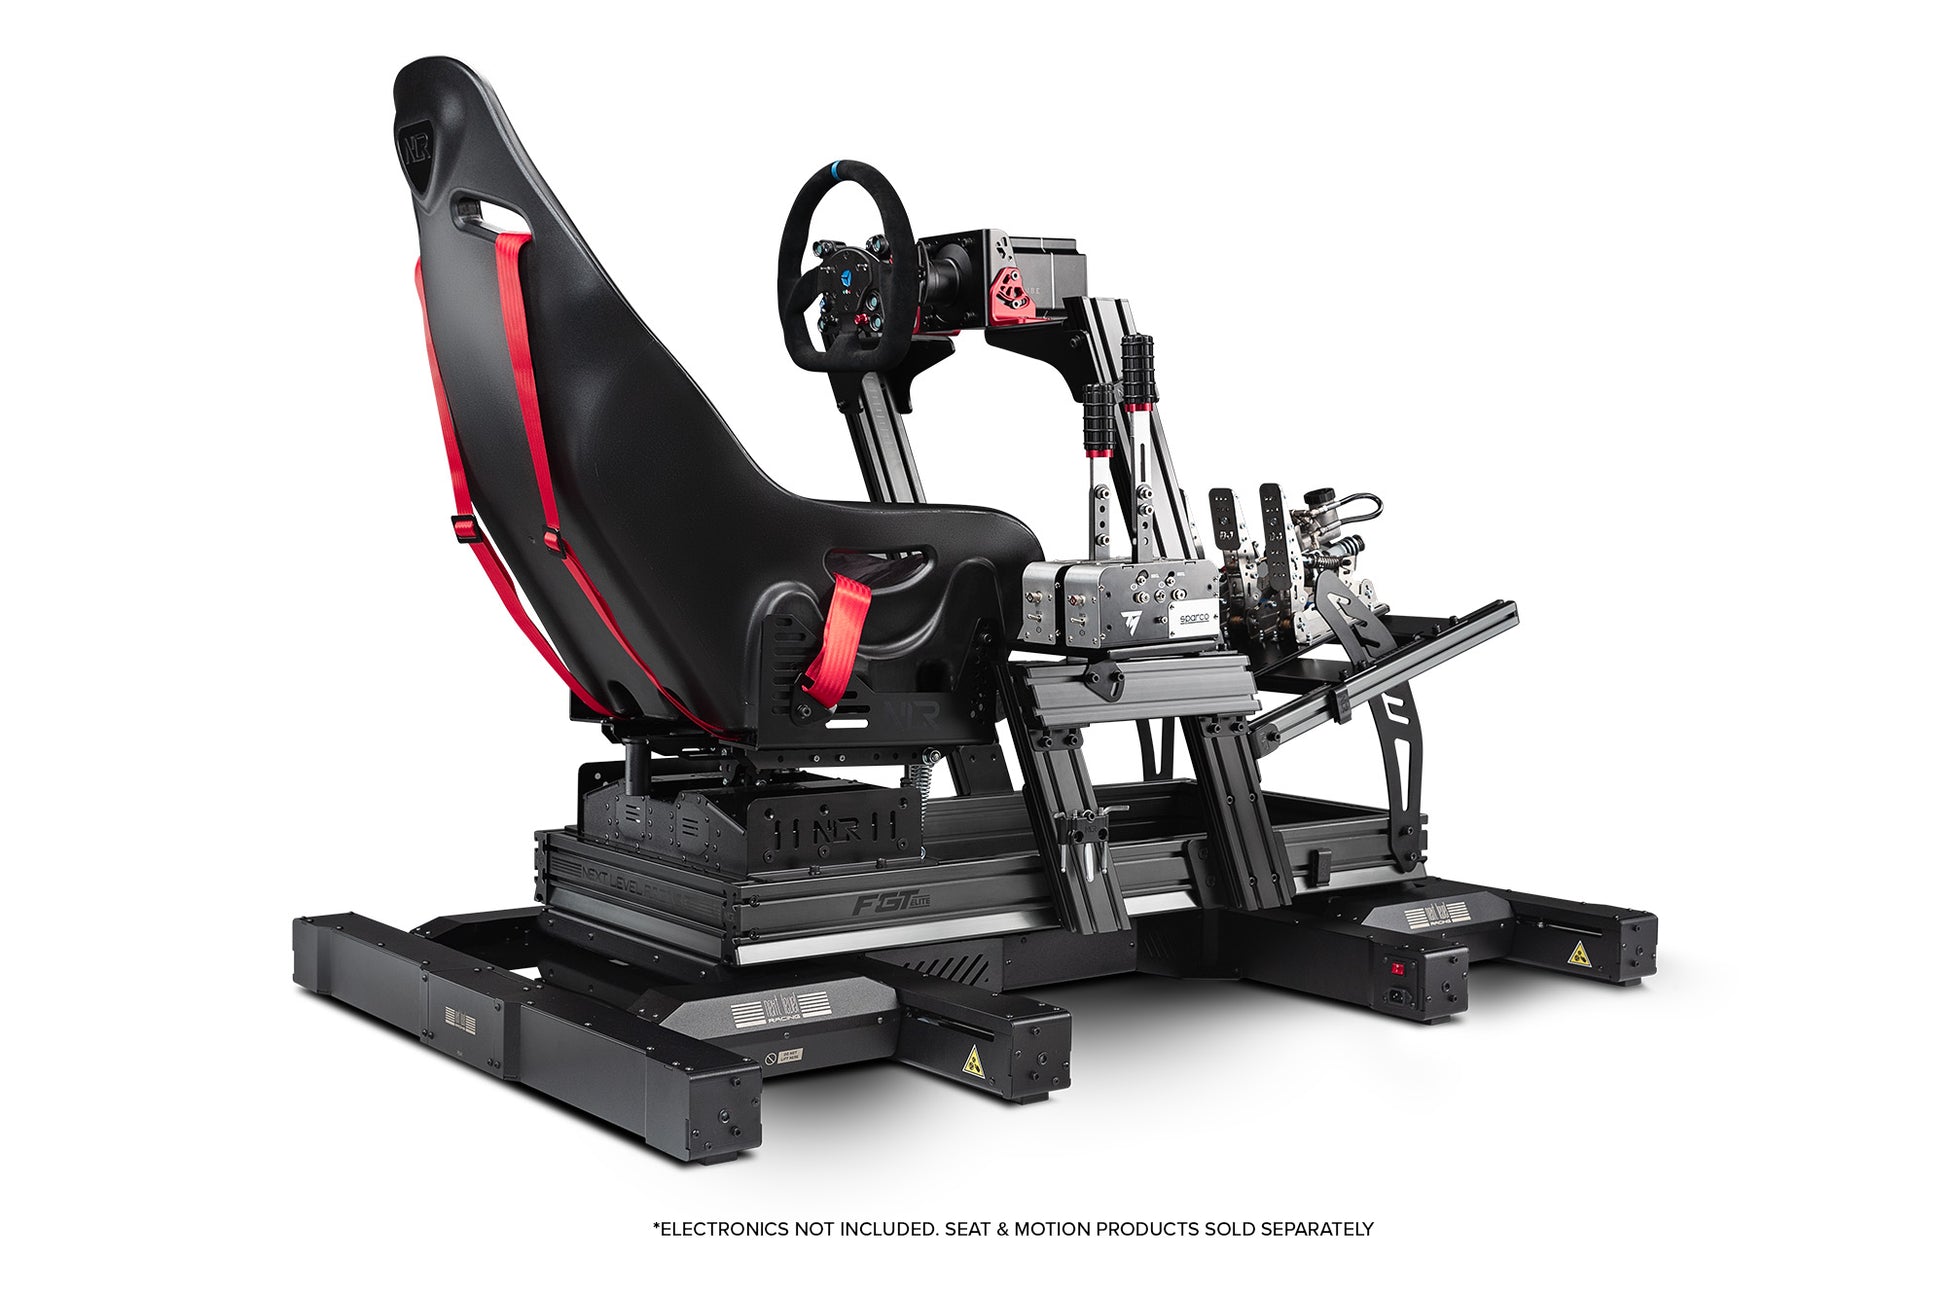 F-GT Elite iRacing Edition - Next Level Racing